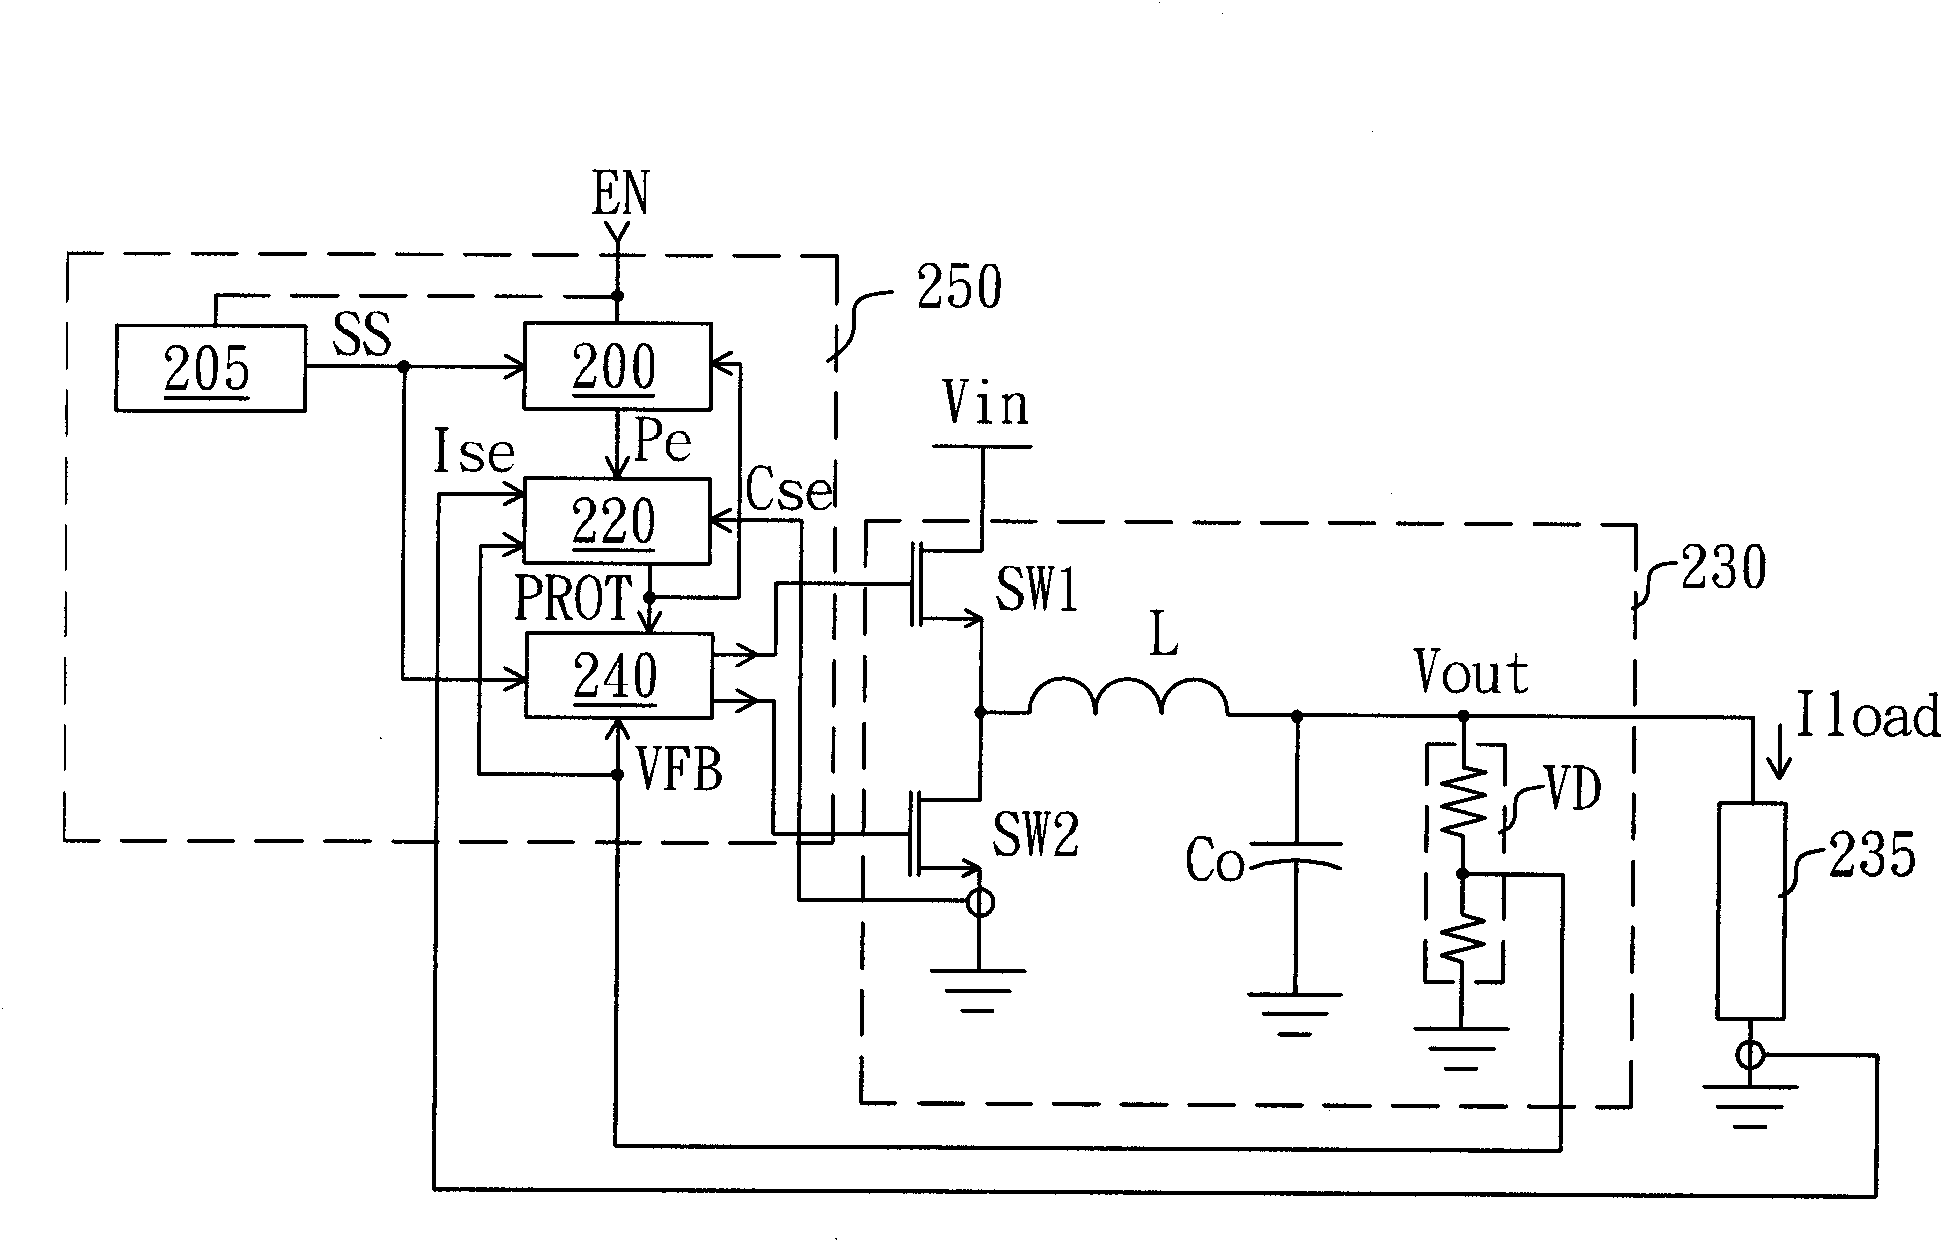 Power conversion circuit and conversion controller